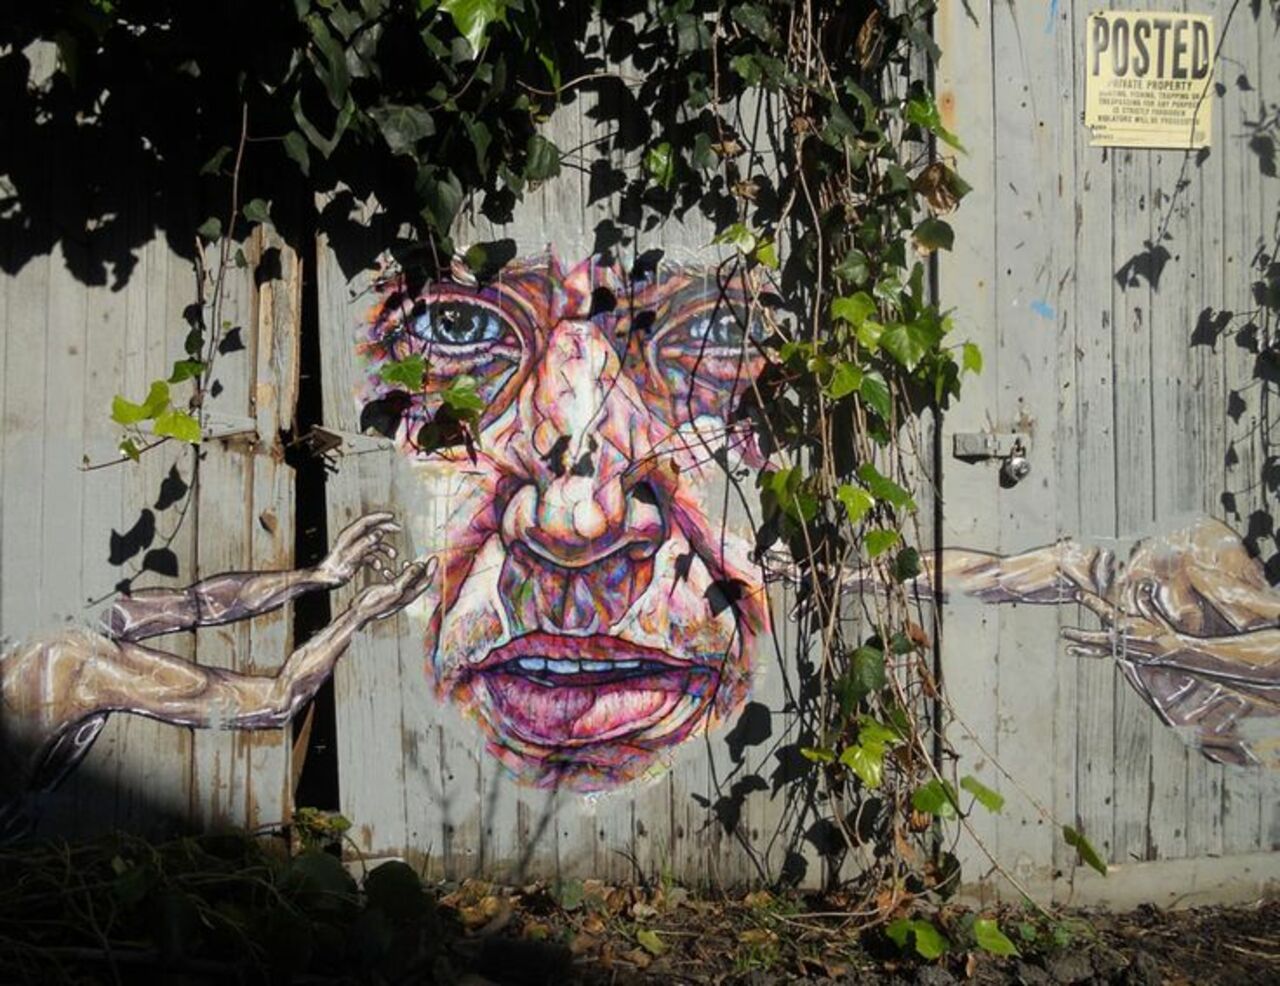 RT @DanielGennaoui: Hiding in the leaves. Find the best #streetart merged with nature: http://bit.ly/1rNbrXm  #artlovers #graffiti http://t.co/5sEM64w6fU